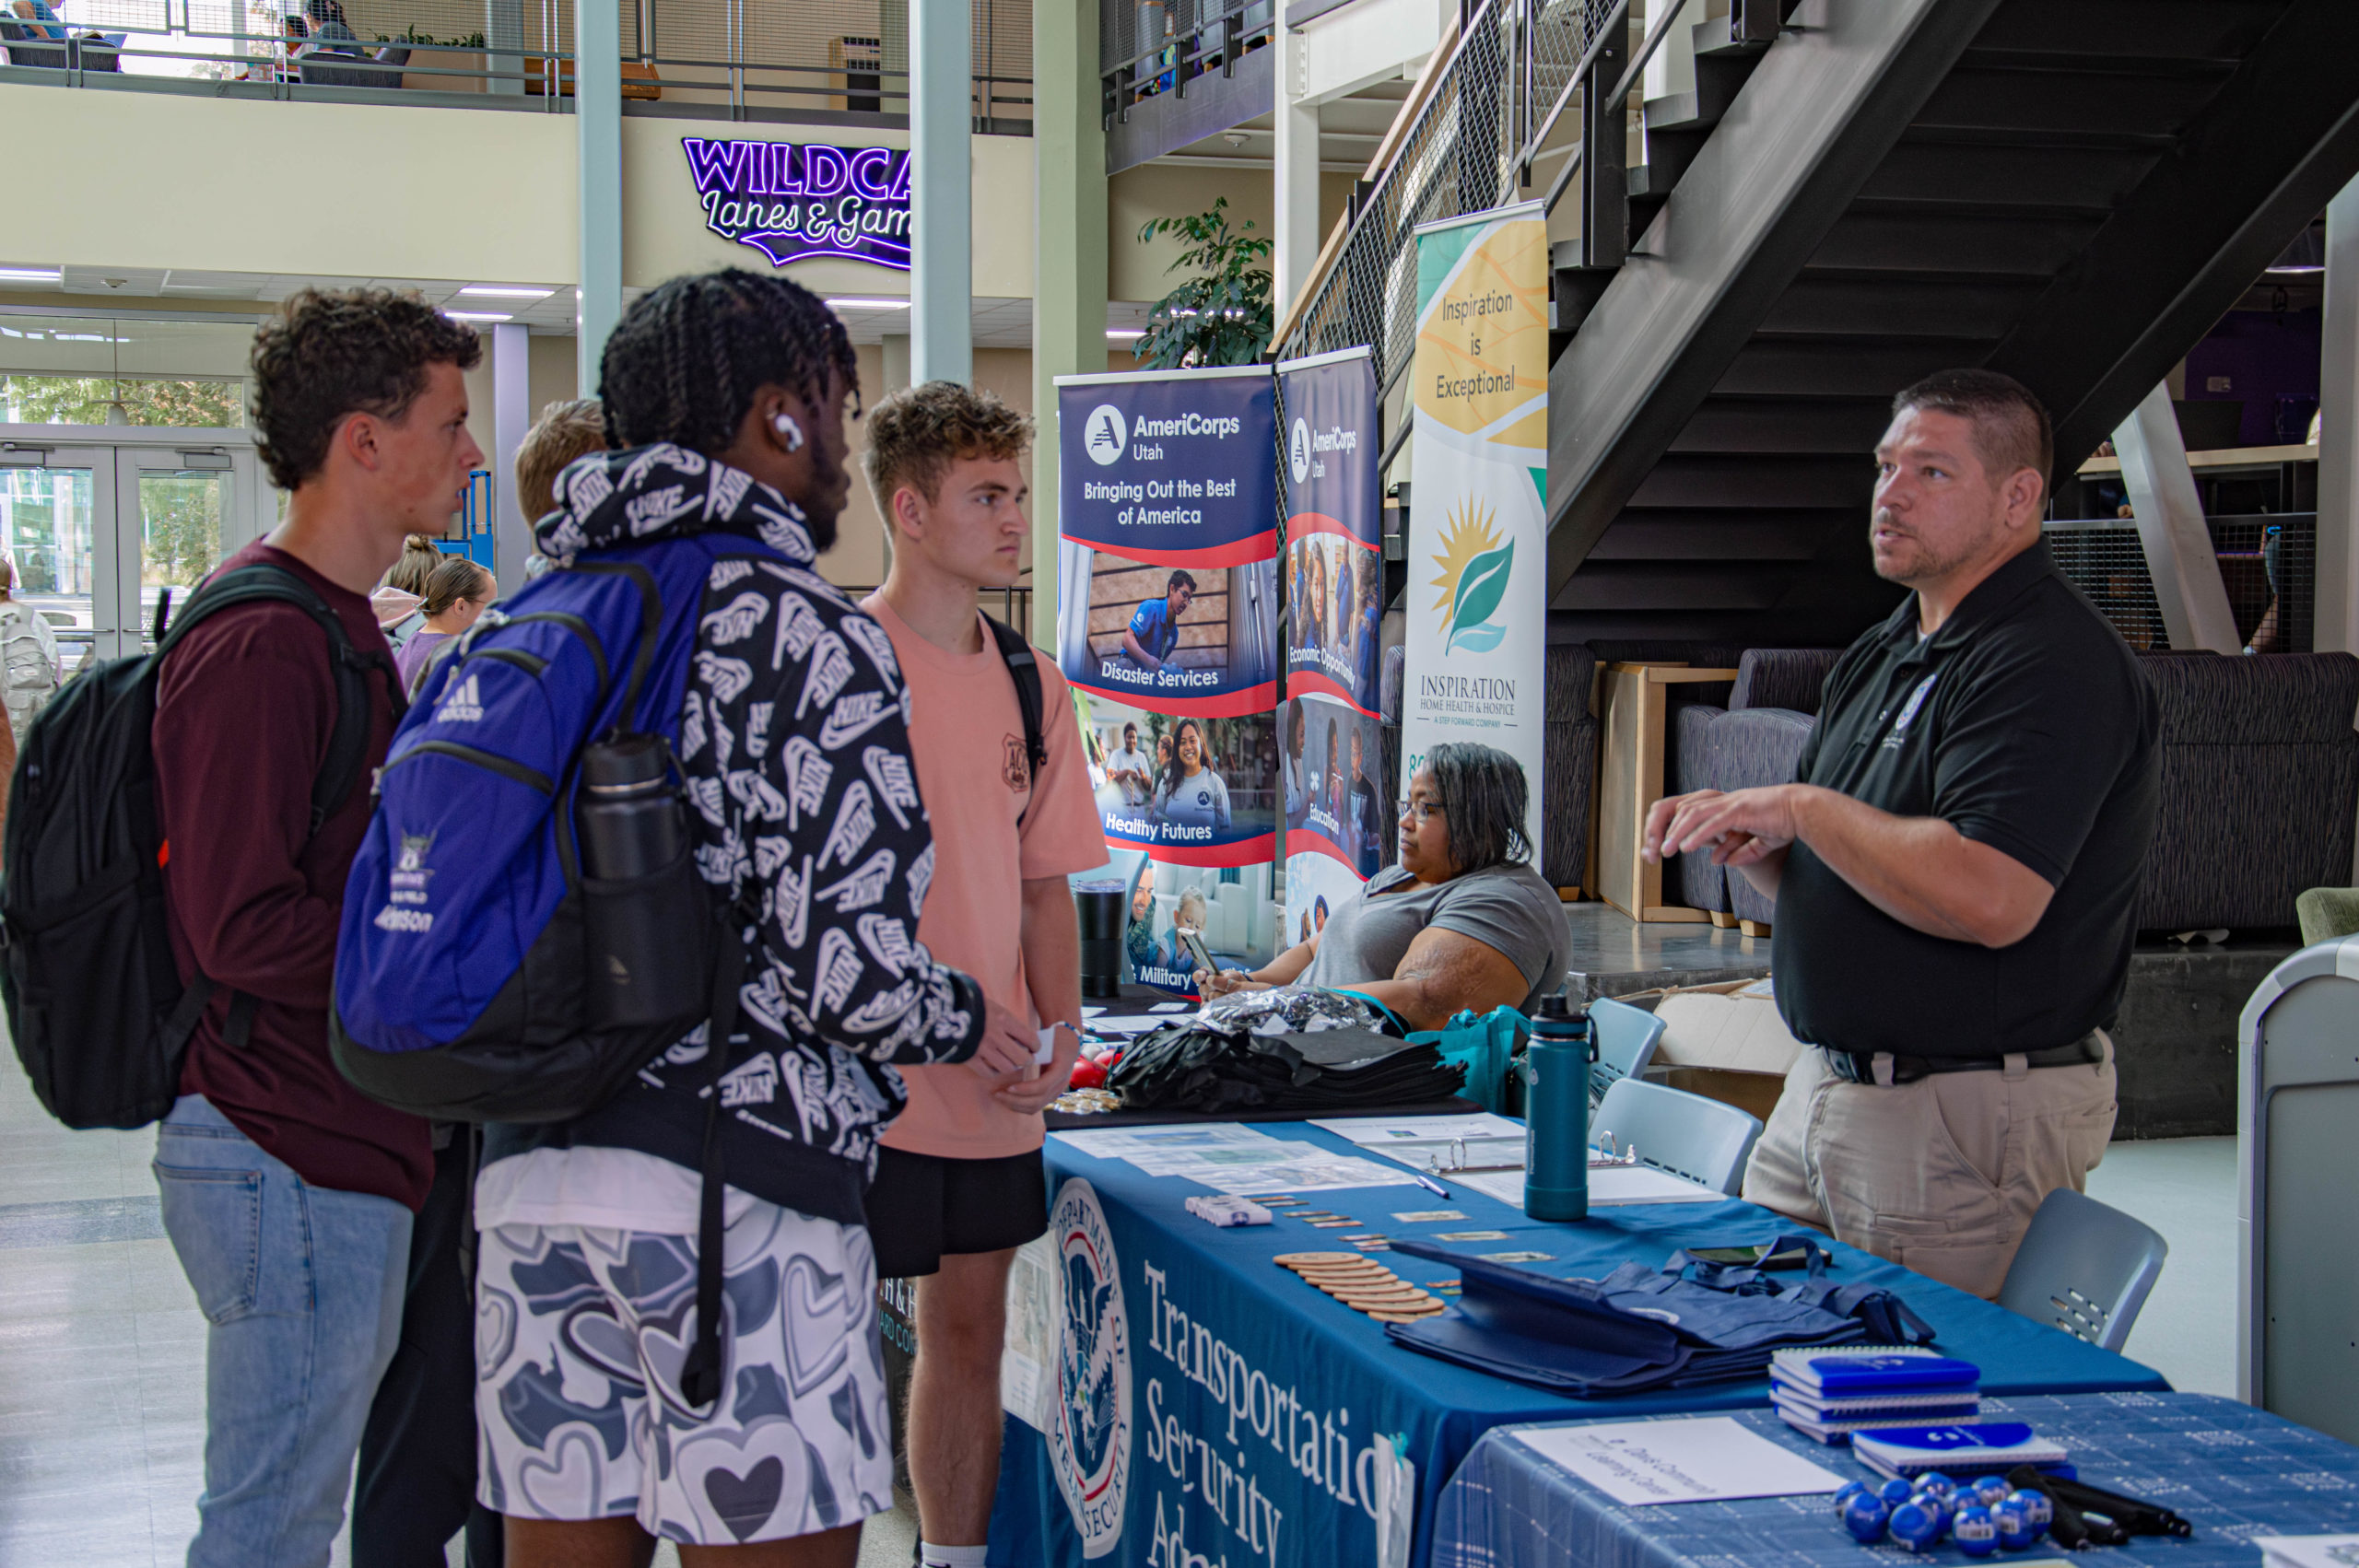 A group of students gather around the Transportation Security Administration booth to discover their services and benefits.